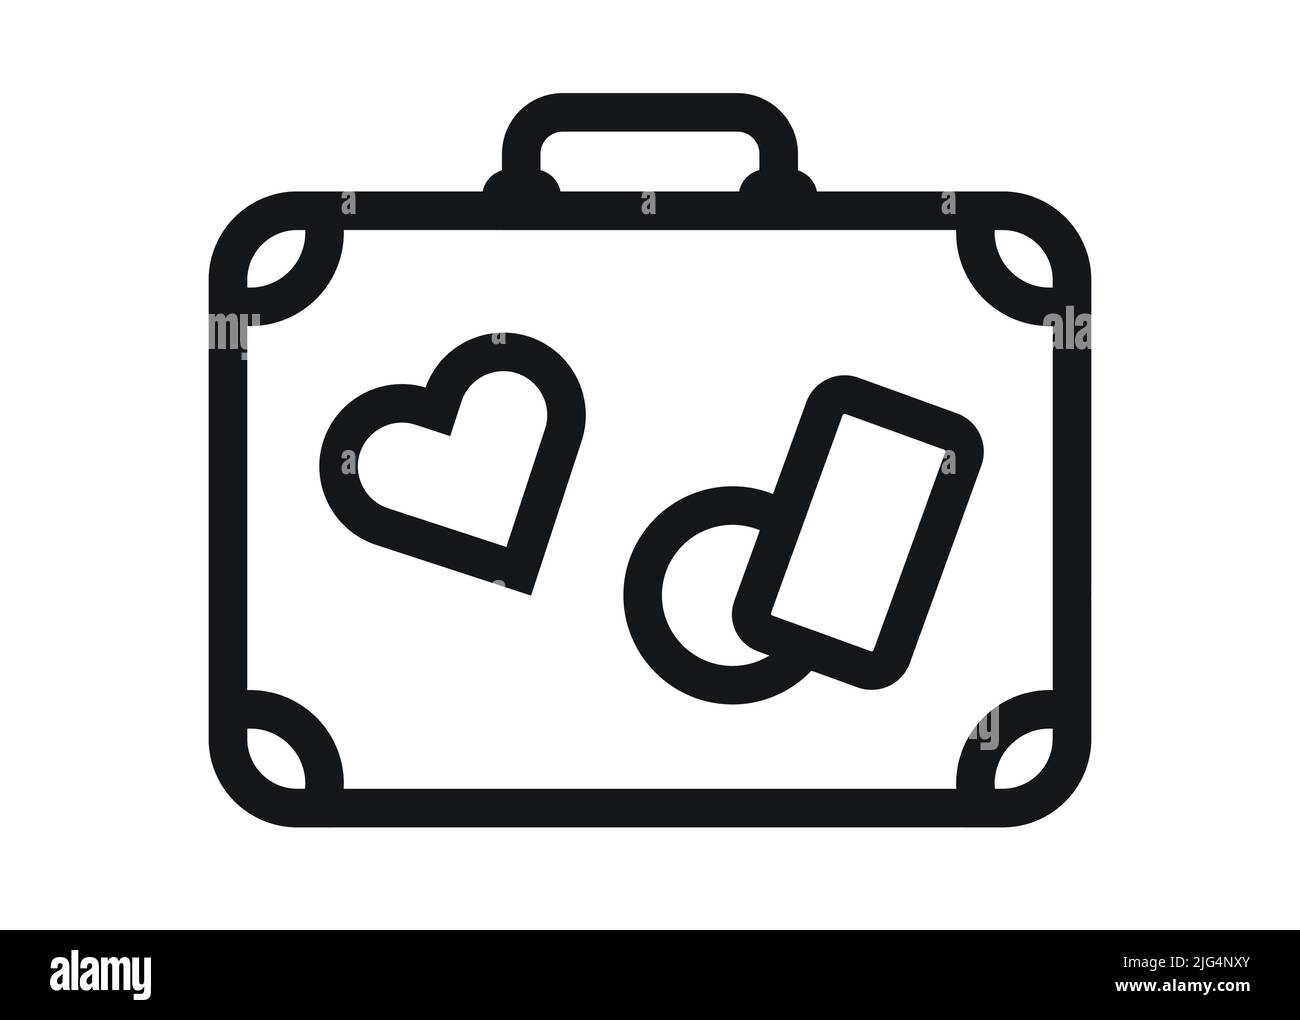 Portmanteau or suitcase with personal tags symbol baggage vector illustration icon Stock Vector